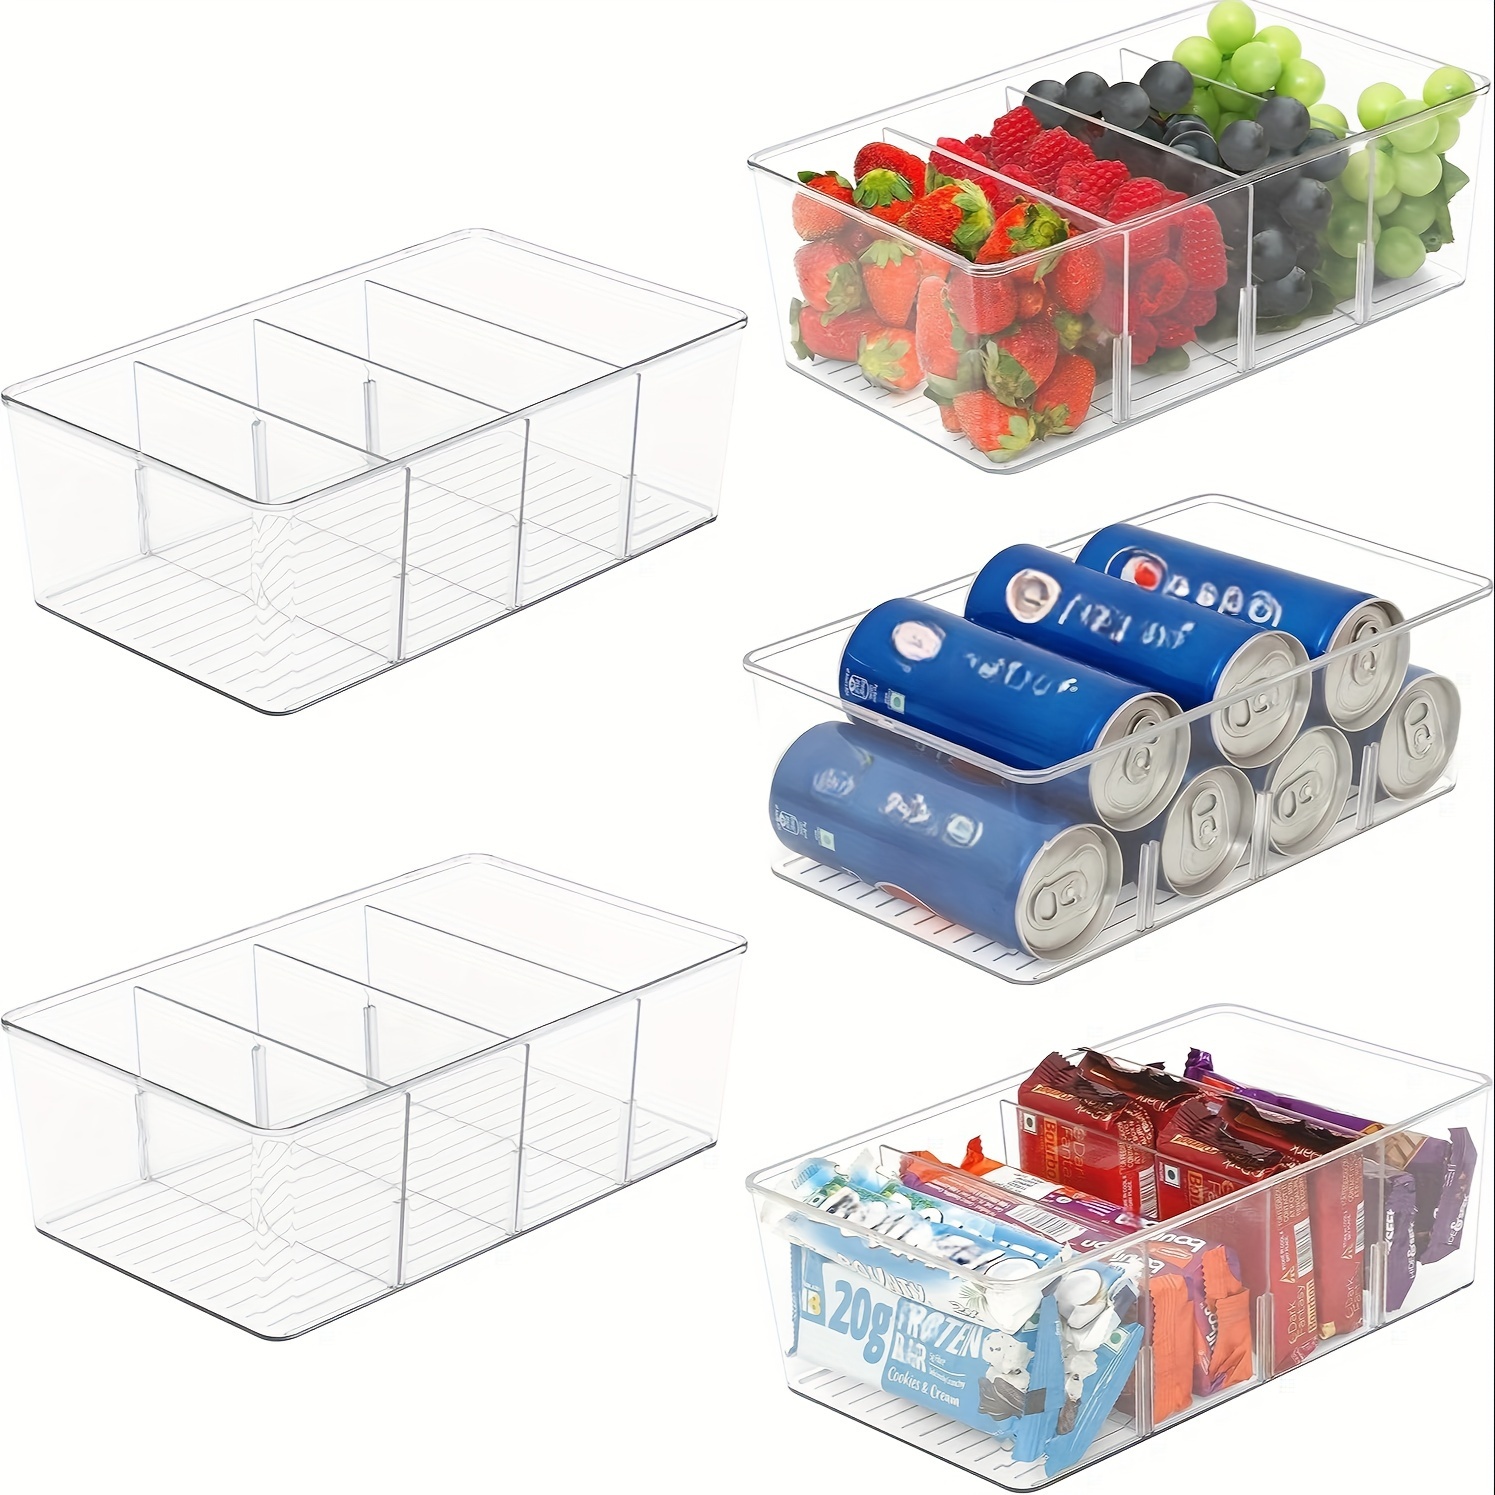 50 Pcs Tin Box Small Tins with Lids Iron Organizer Candy Case Candy+box Tea Leaves Container, Size: 80x50cm/31x20in